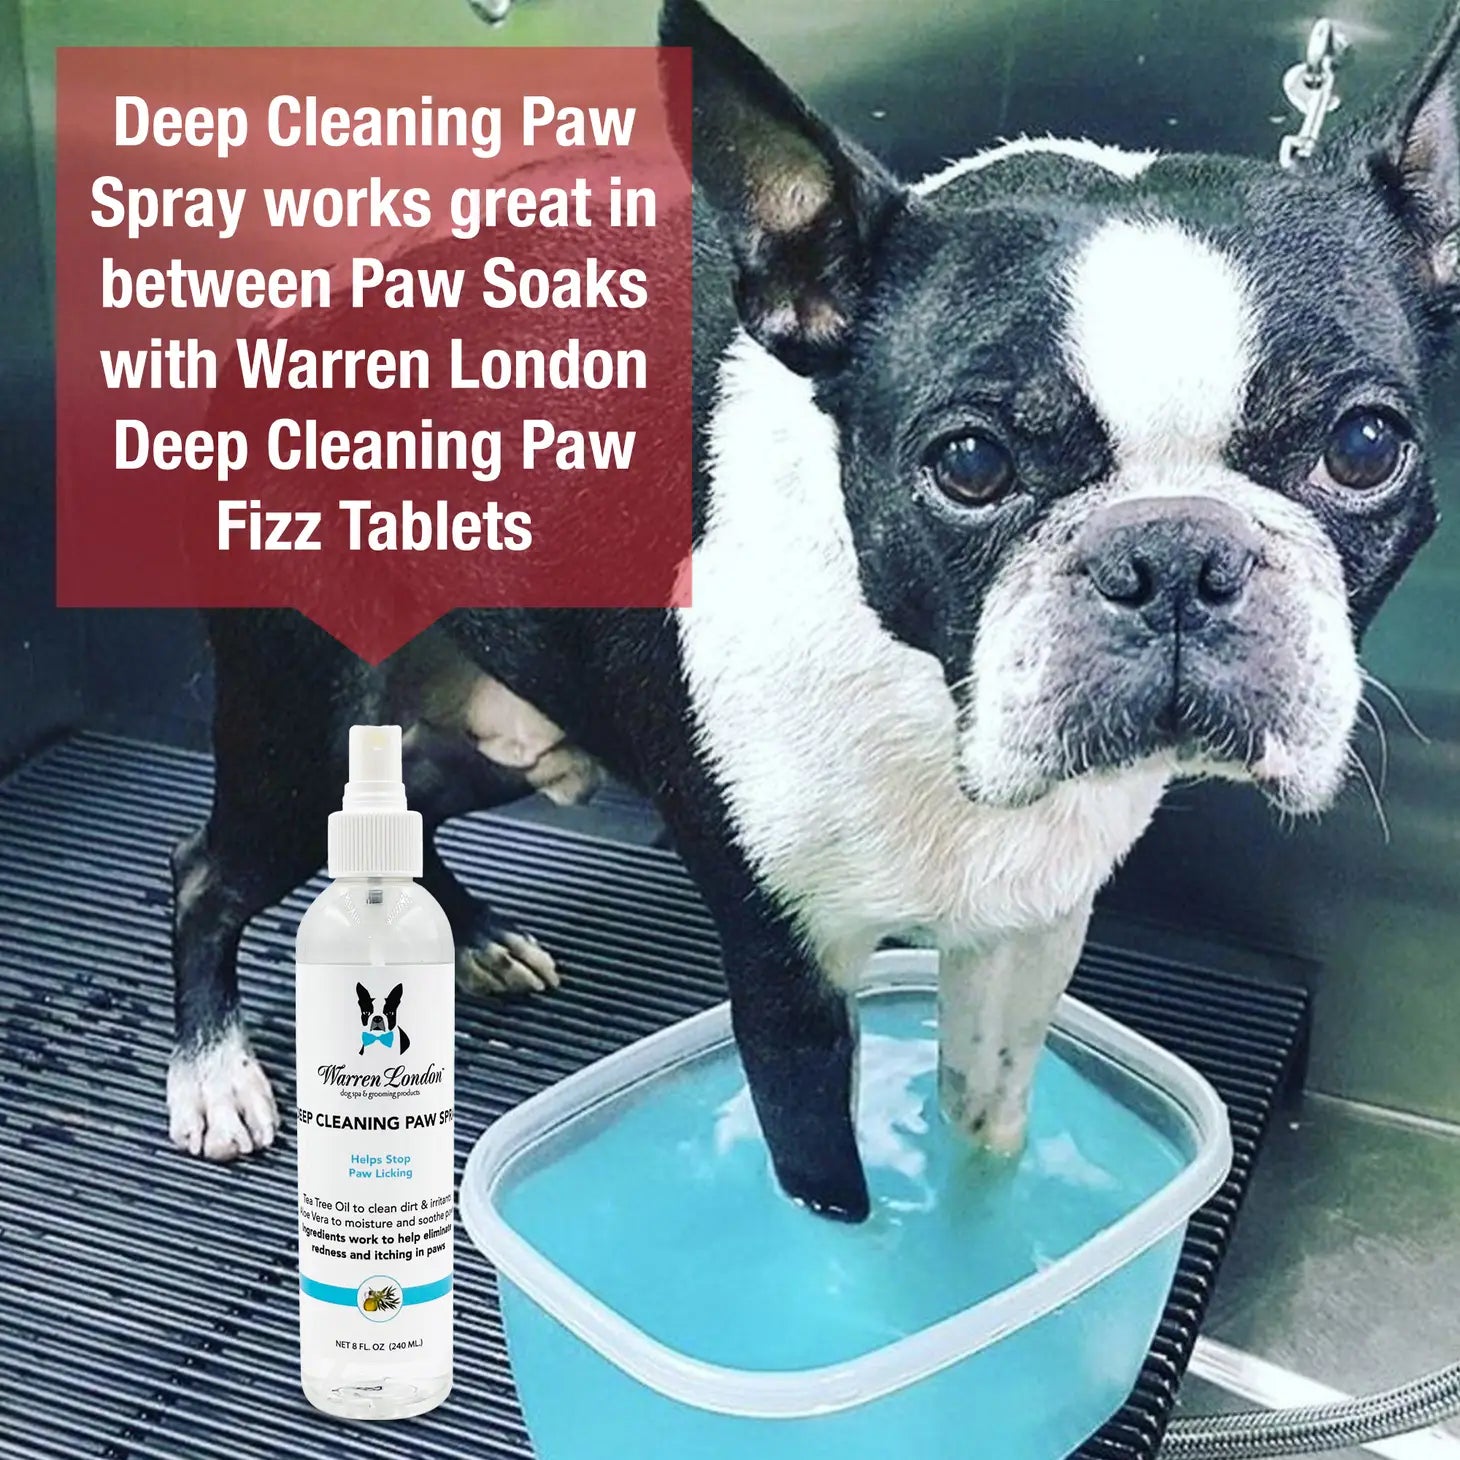 Deep Cleaning Paw Spray